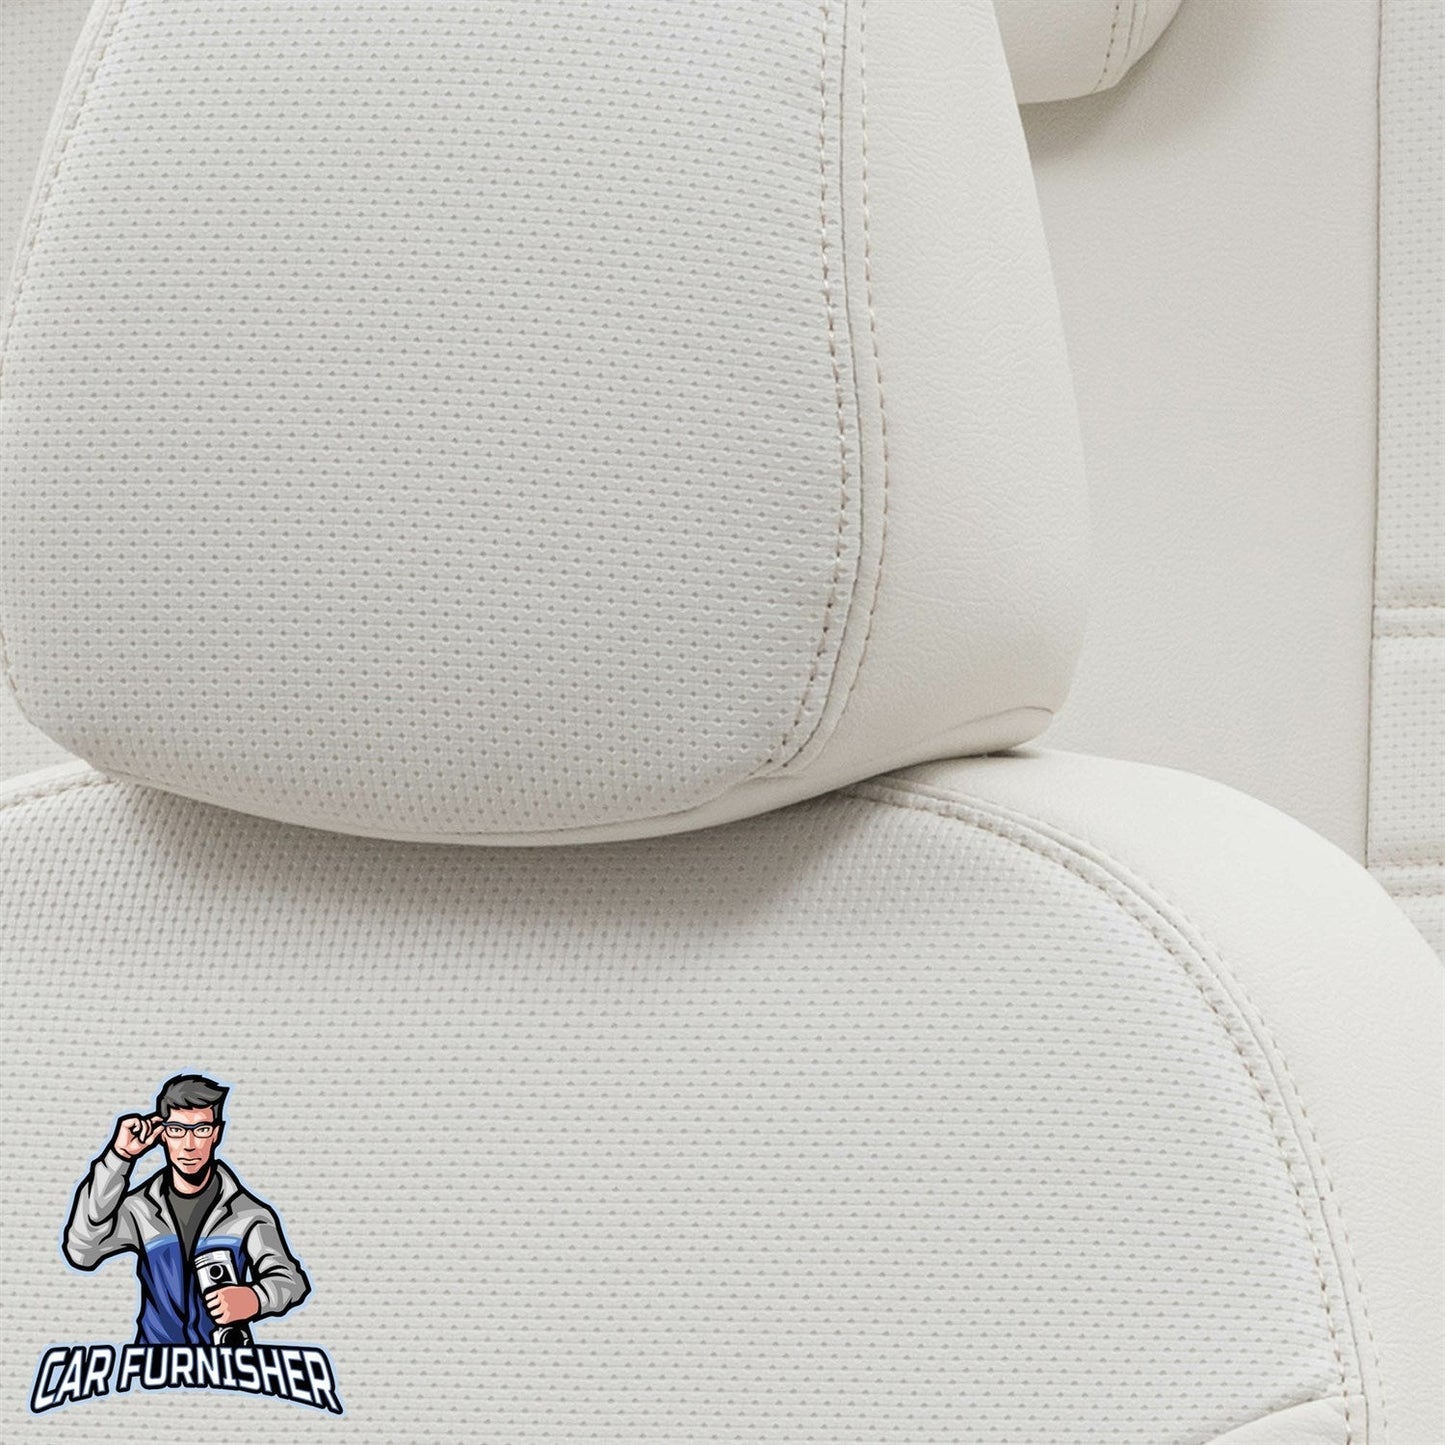 Fiat Stilo Seat Covers New York Leather Design Ivory Leather